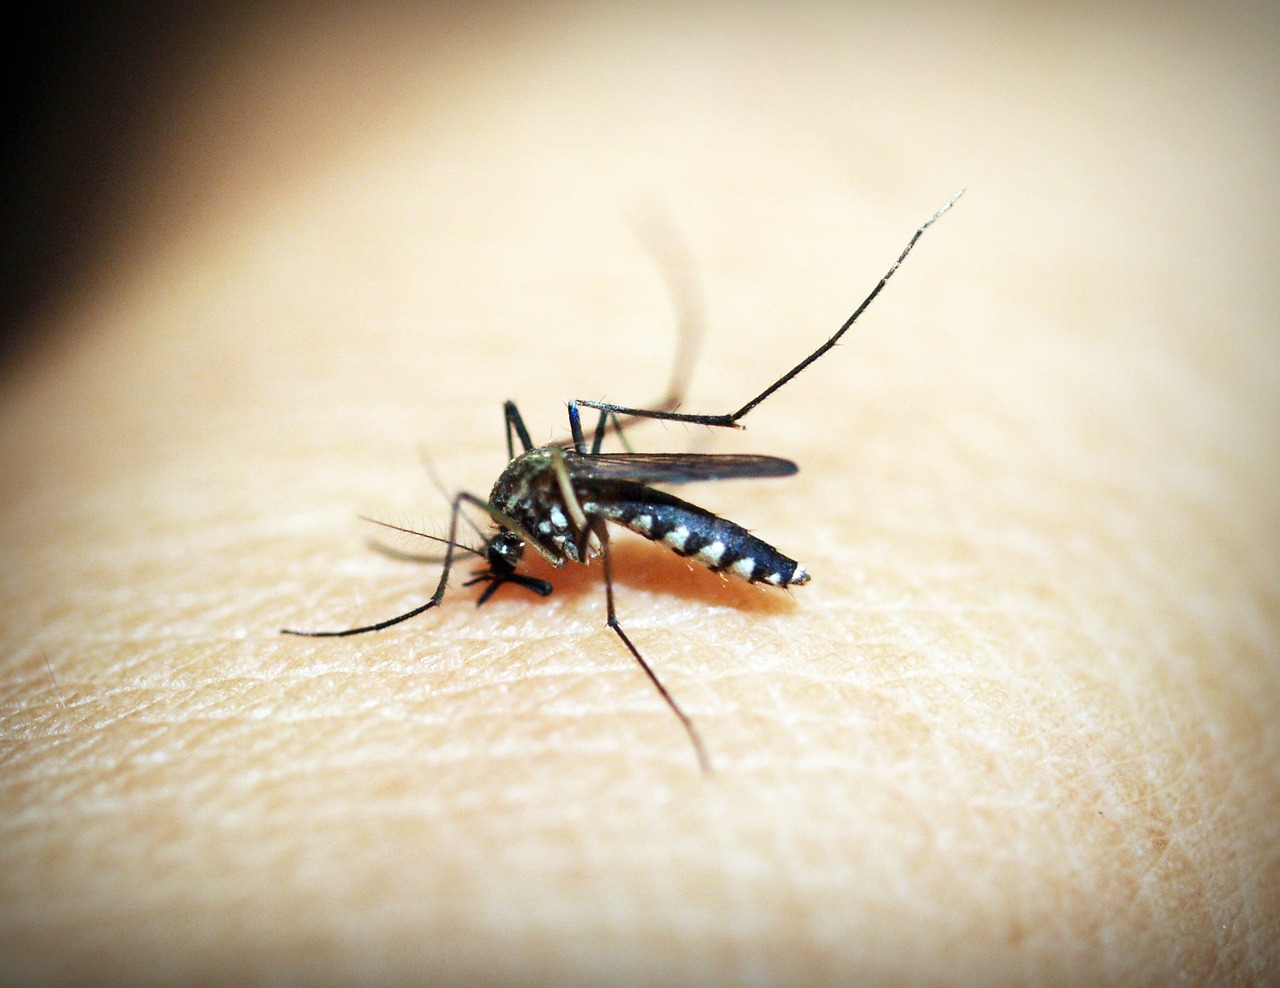 Stopping Malaria with Malaria-Resistant Mosquitoes